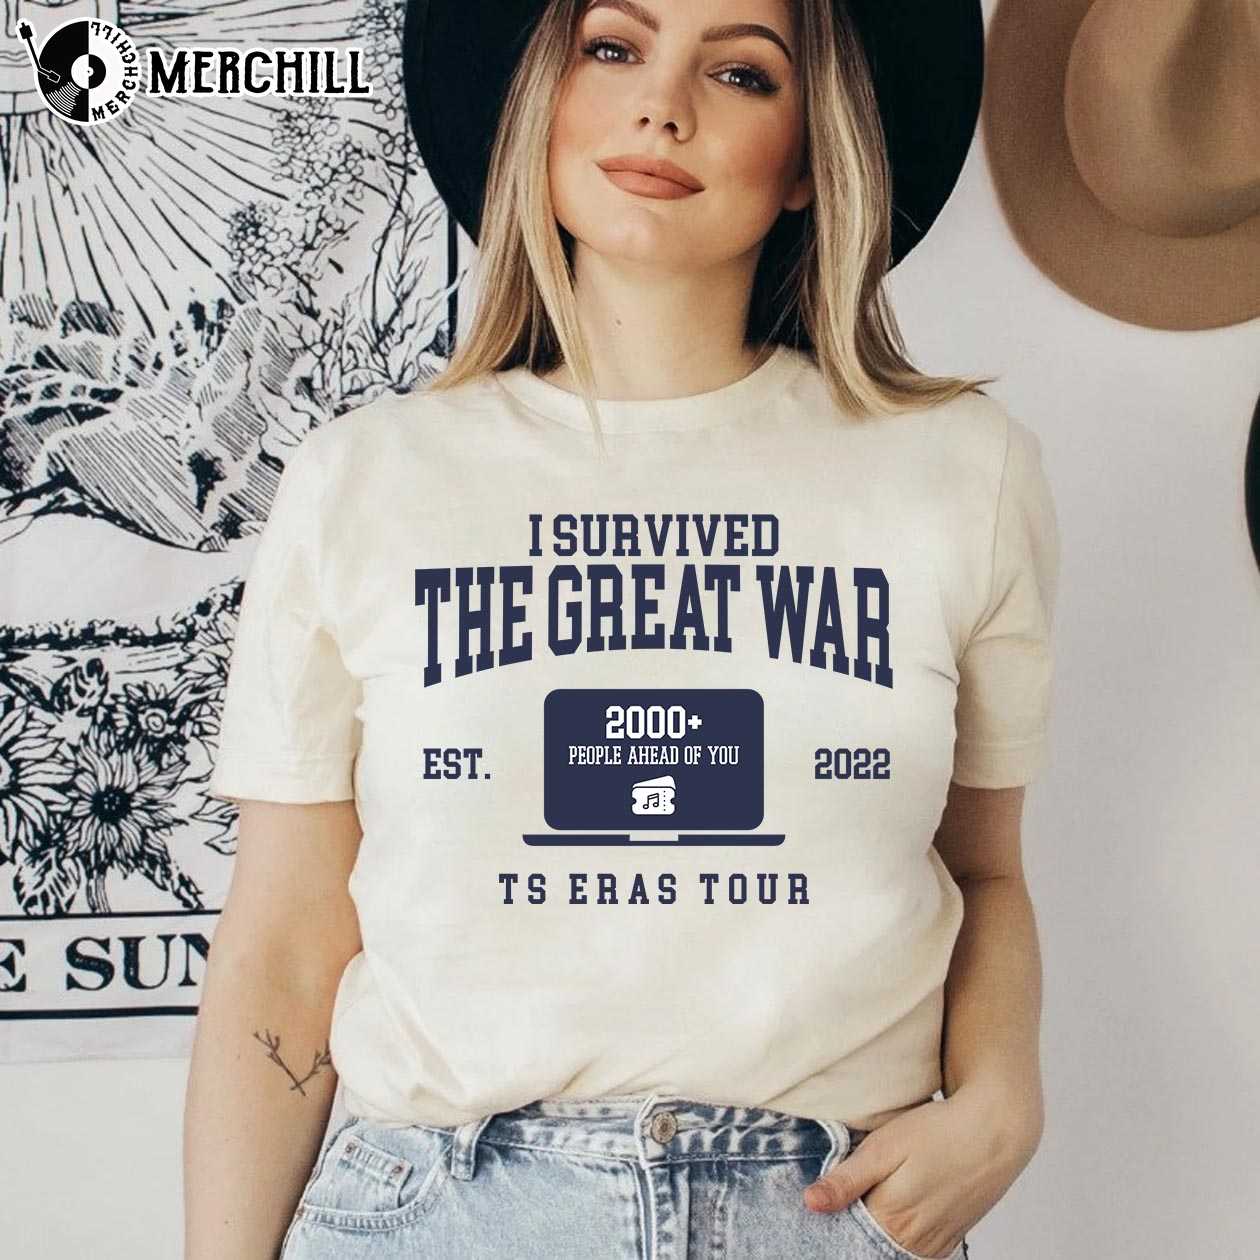 I Survived The Great War TS Eras Tour Sweatshirt Funny Taylor Swift Shirt -  Happy Place for Music Lovers